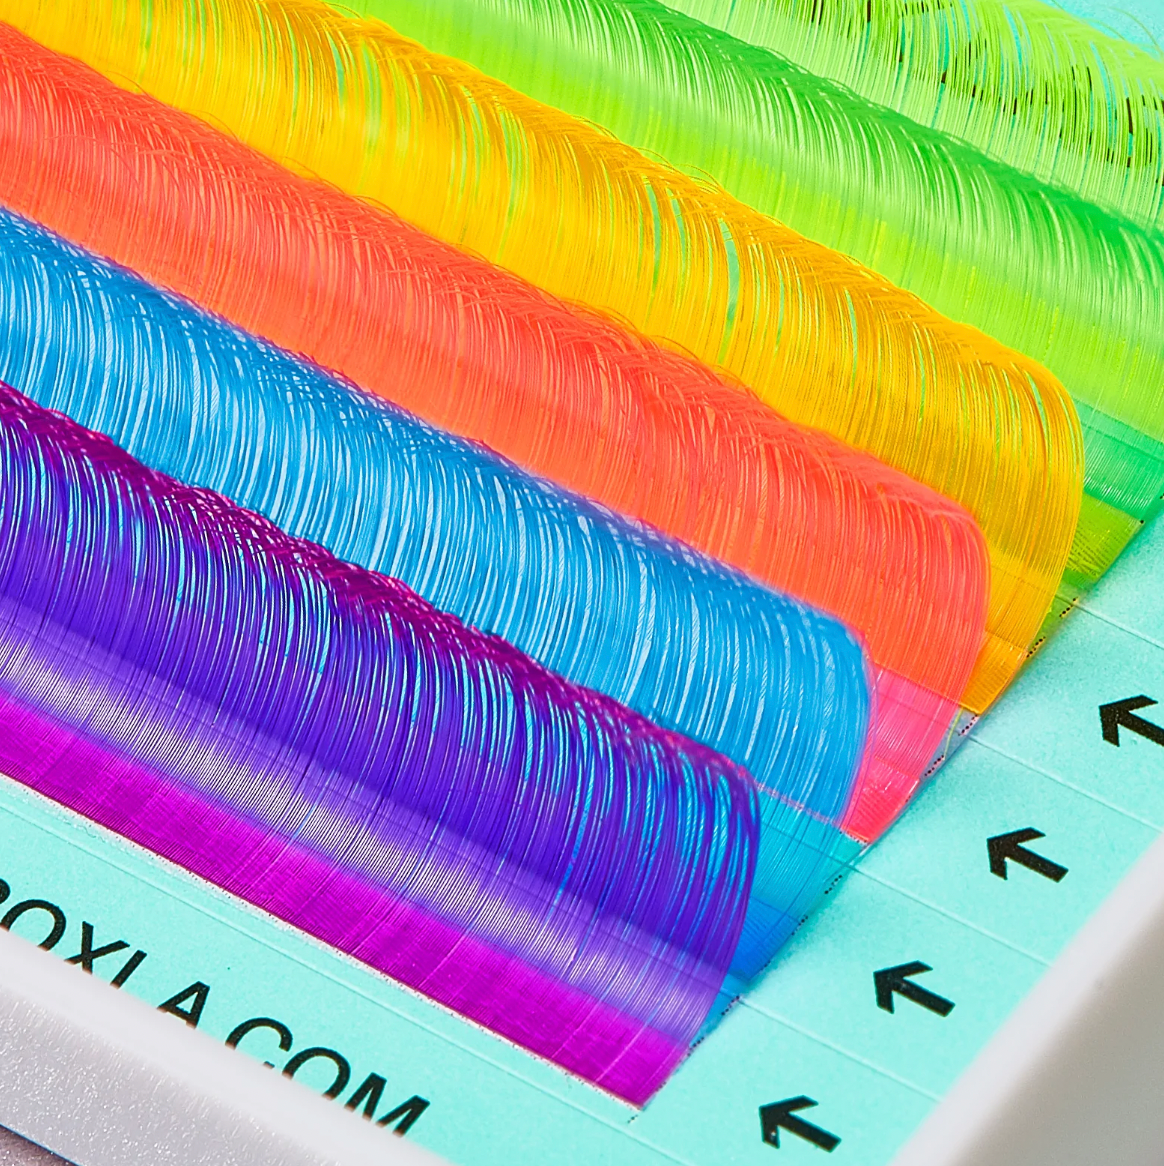 Velvet Mink 0.05 NEON COLOUR Lashes, Neon Yellow, green, orange pink, purple, blue Make fans up to 10D to make an impact and 5-7D for highlights. Lash Box LA Australia